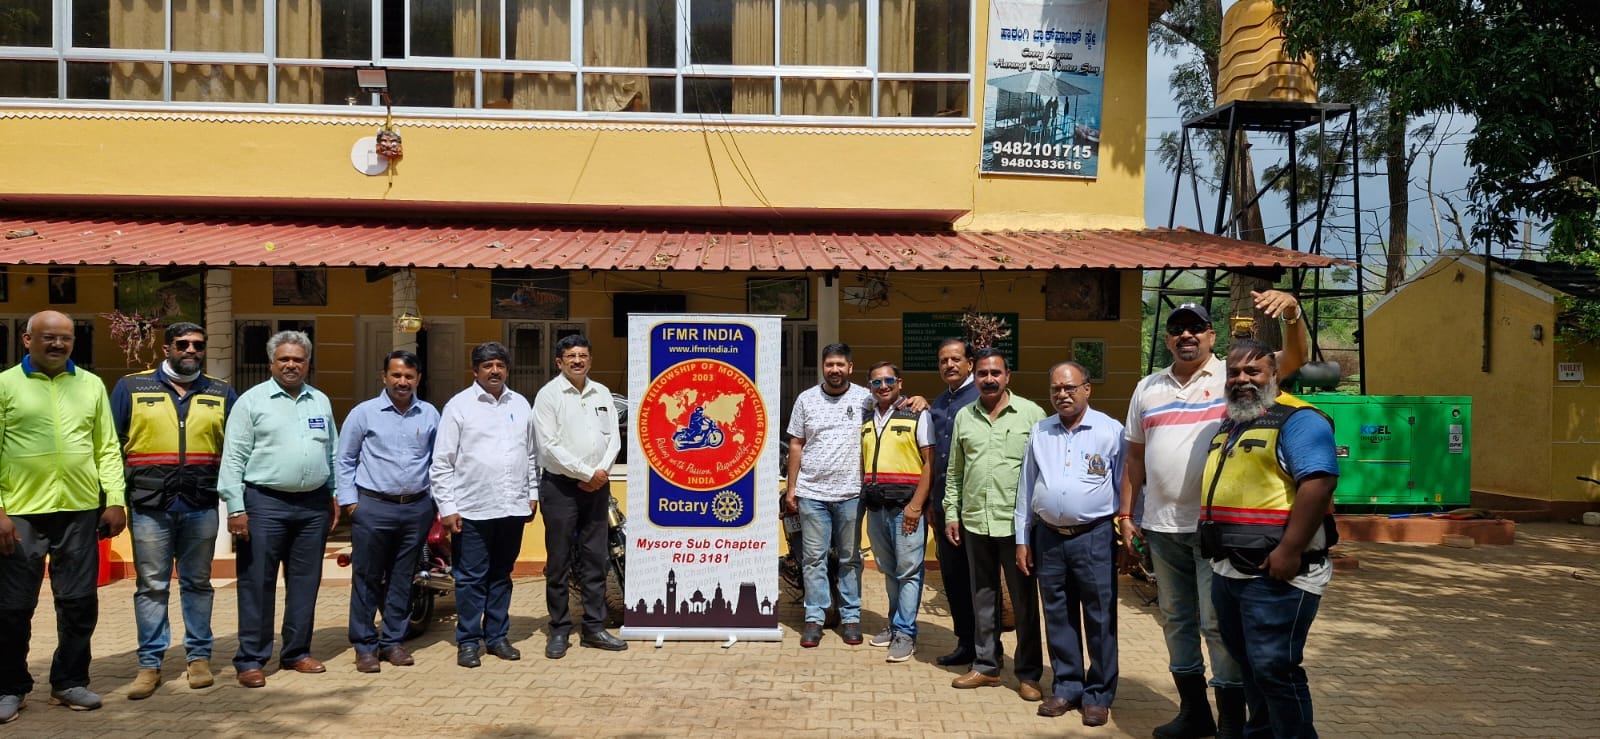 Breakfast Ride by Mysore Sub Chapter